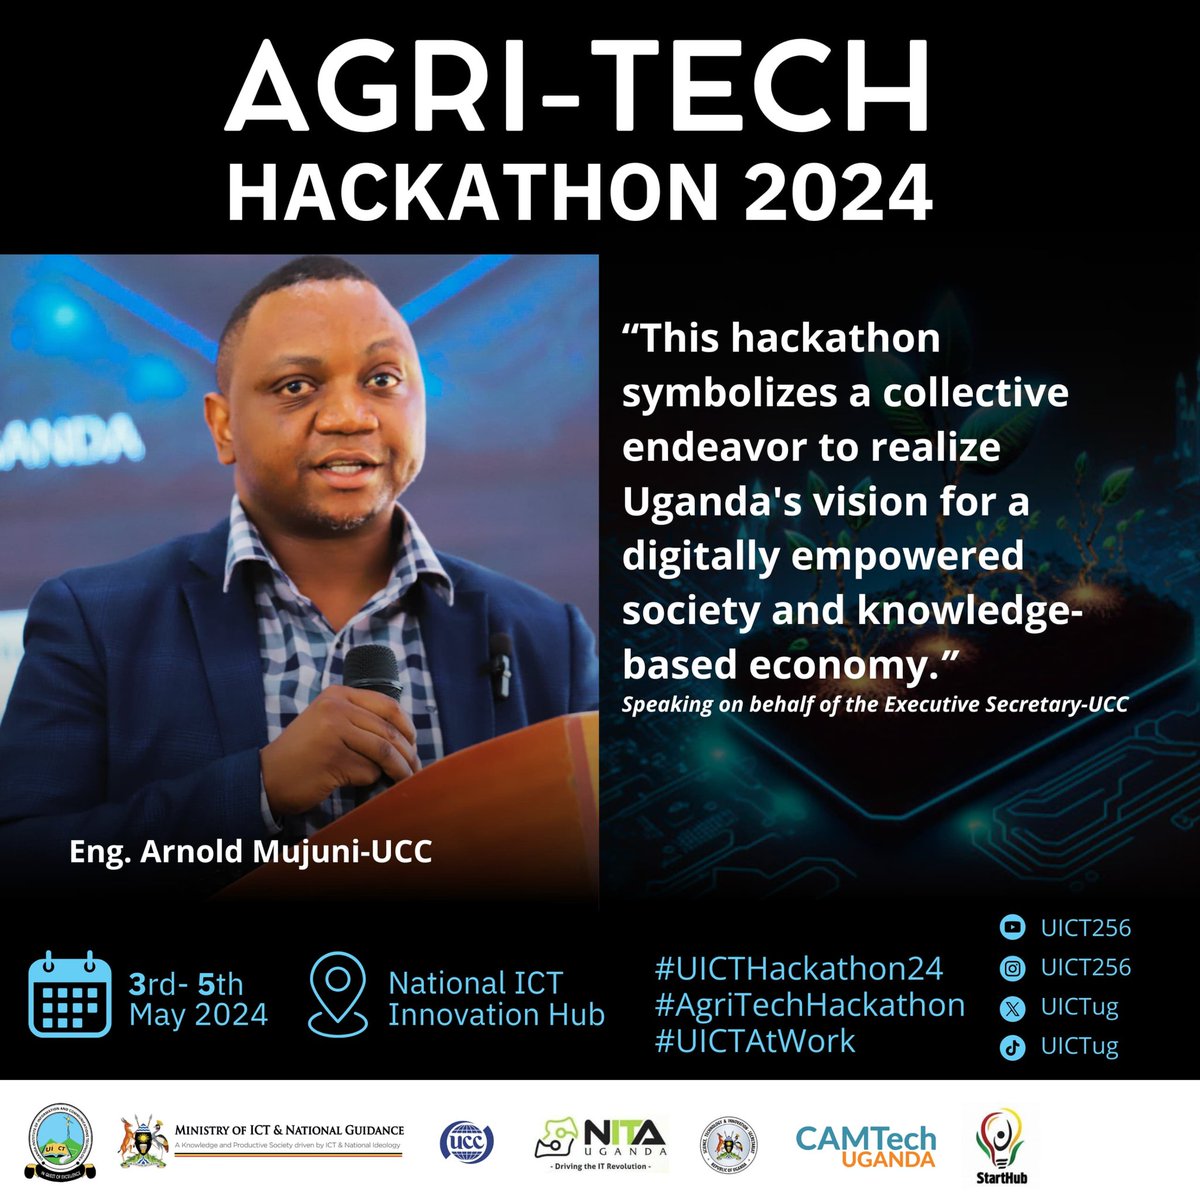 The innovation program is in line with Uganda's vision of ensuring over 90% of Ugandan households are connected to internet by 2040 and have access to digital services. @MoICT_Ug @UICTug @MAAIF_Uganda #AgriTechHackathon #UICTATWork